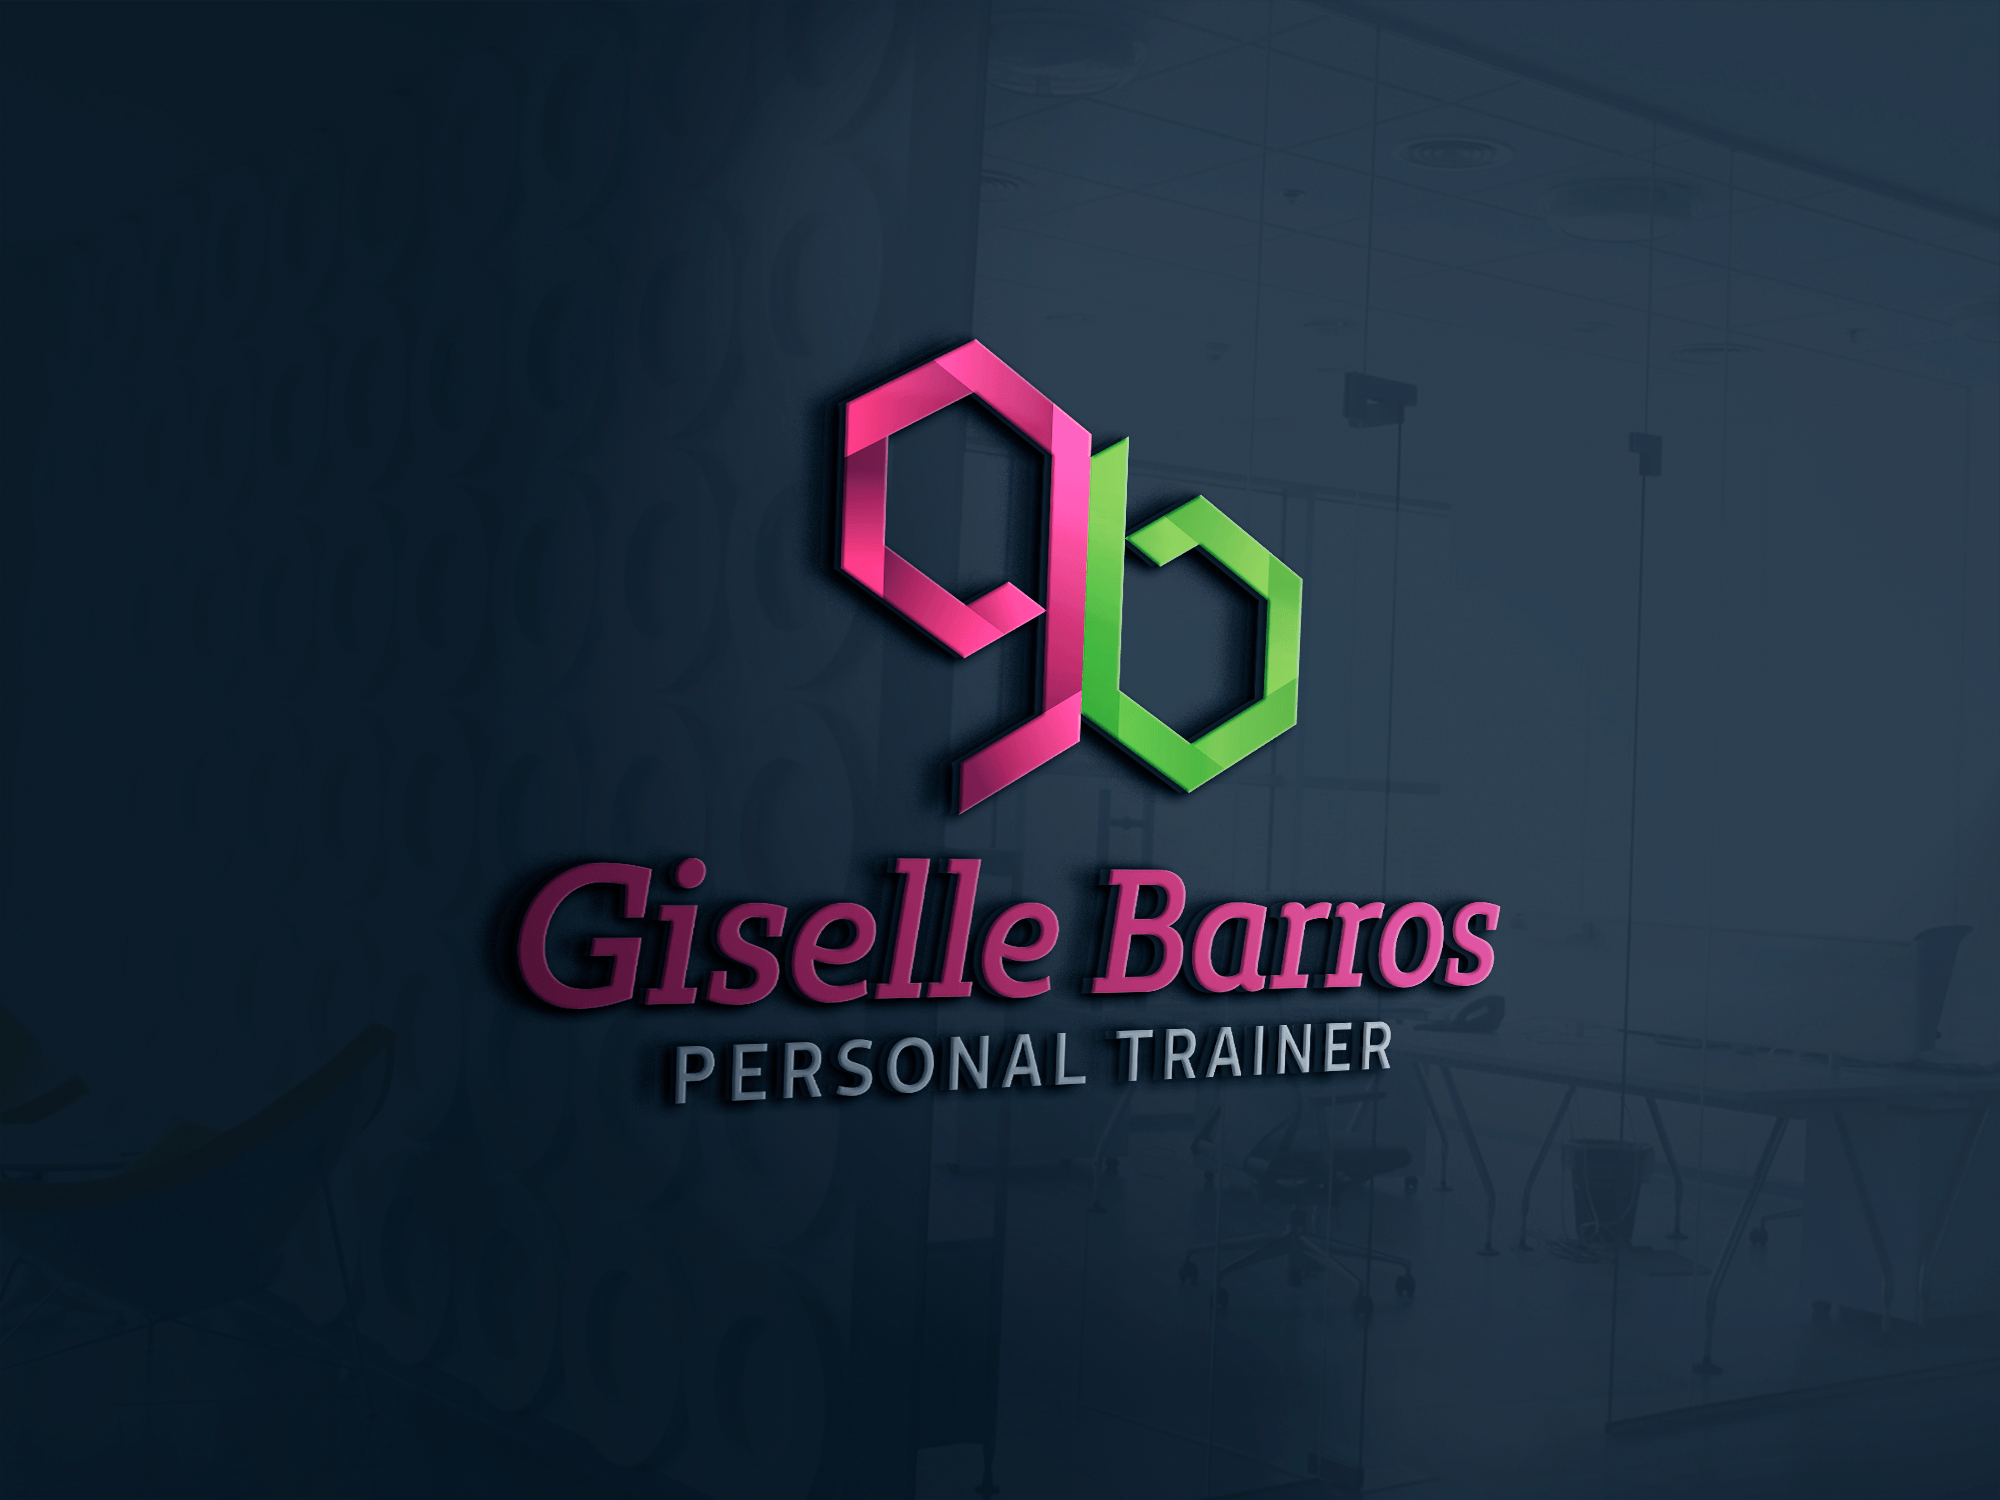 Giselle Barros Personal Trainer